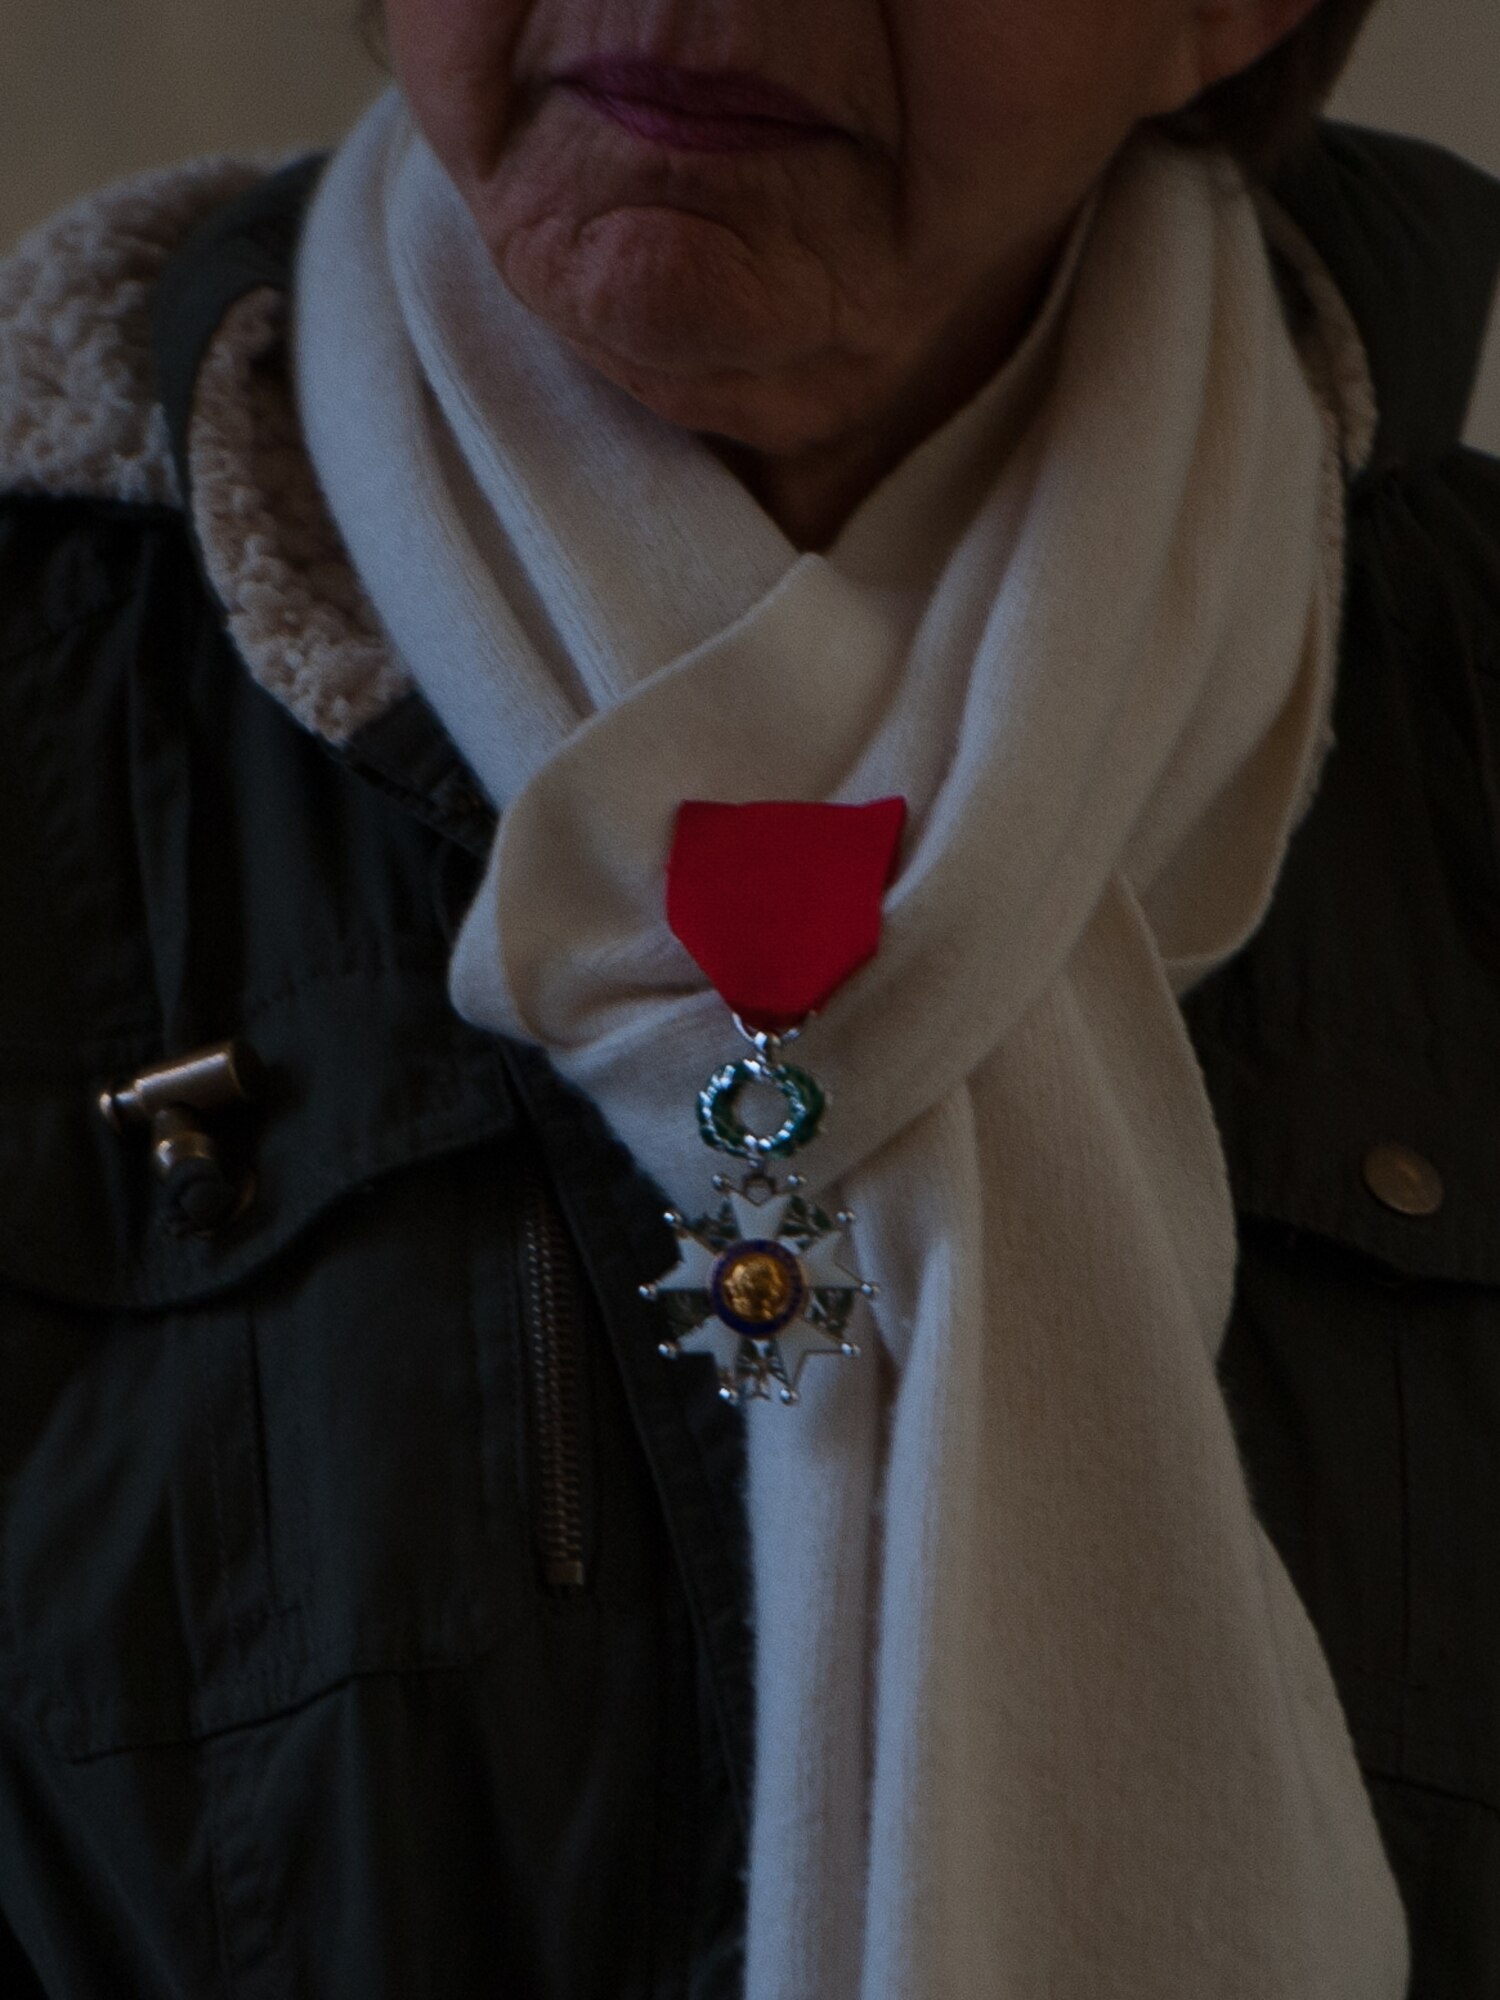 A woman awaits for the wreath laying ceremony to begin at the Lorraine American Cemetery to honor the deceased war veterans Nov. 11, 2016, at St. Avold, France. Pinned to her scarf is her deceased husband’s Legion of Merit medal, awarded to U.S. servicemembers for exceptionally meritorious conduct in the performance of outstanding services and achievements. Veteran’s Day is observed annually on November 11 and commemorates military veterans who currently serve or have served the U.S. armed forces, including those who gave the ultimate sacrifice. According to the DoD and Veterans Administration, since World War I, approximately 624,000 U.S. servicemembers have been killed in action battling in wars and conflicts. The Lorraine American Cemetery contains the buried remains of over 10,000 of them. It is the largest burial site of U.S. servicemembers in Europe. (U.S. Air Force photo by Airman 1st Class Lane T. Plummer)